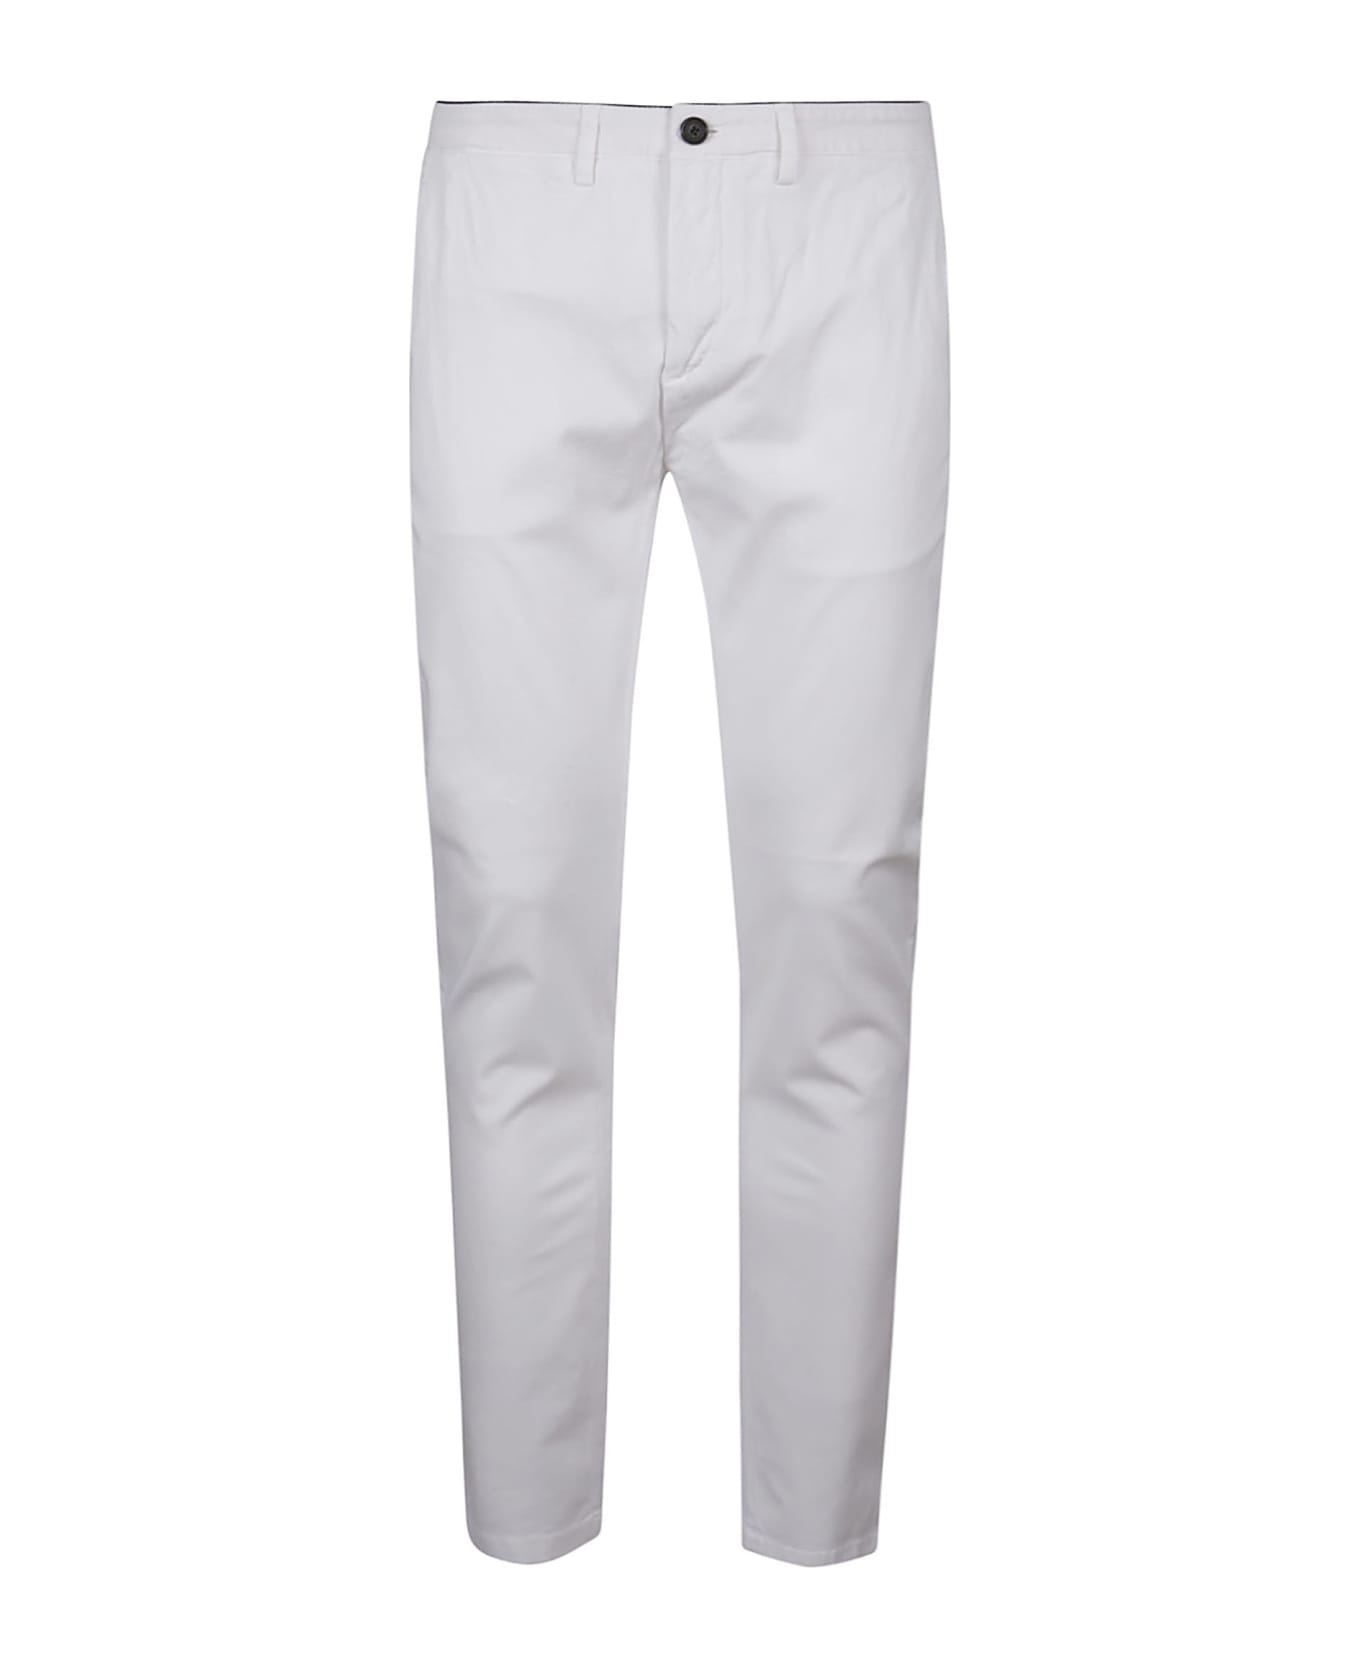 Department Five Mike Chinos Superslim Pant - Bianco Ottico